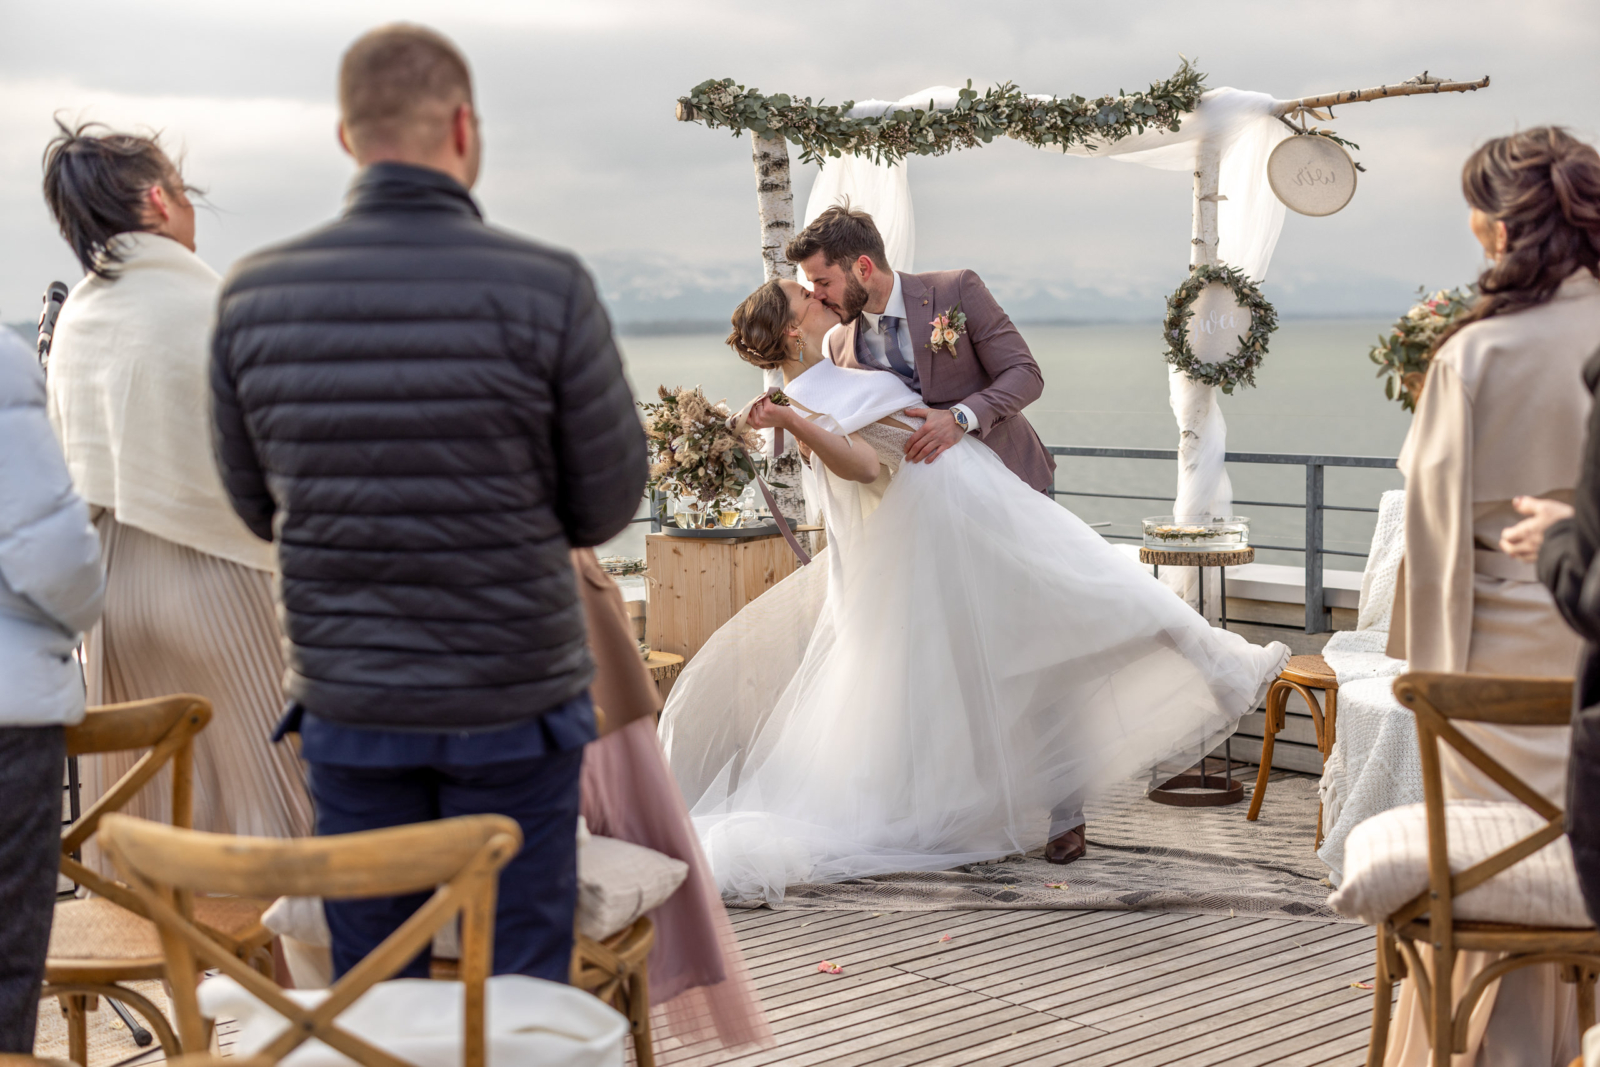 First Kiss during the winter wedding by the Lake of Constance